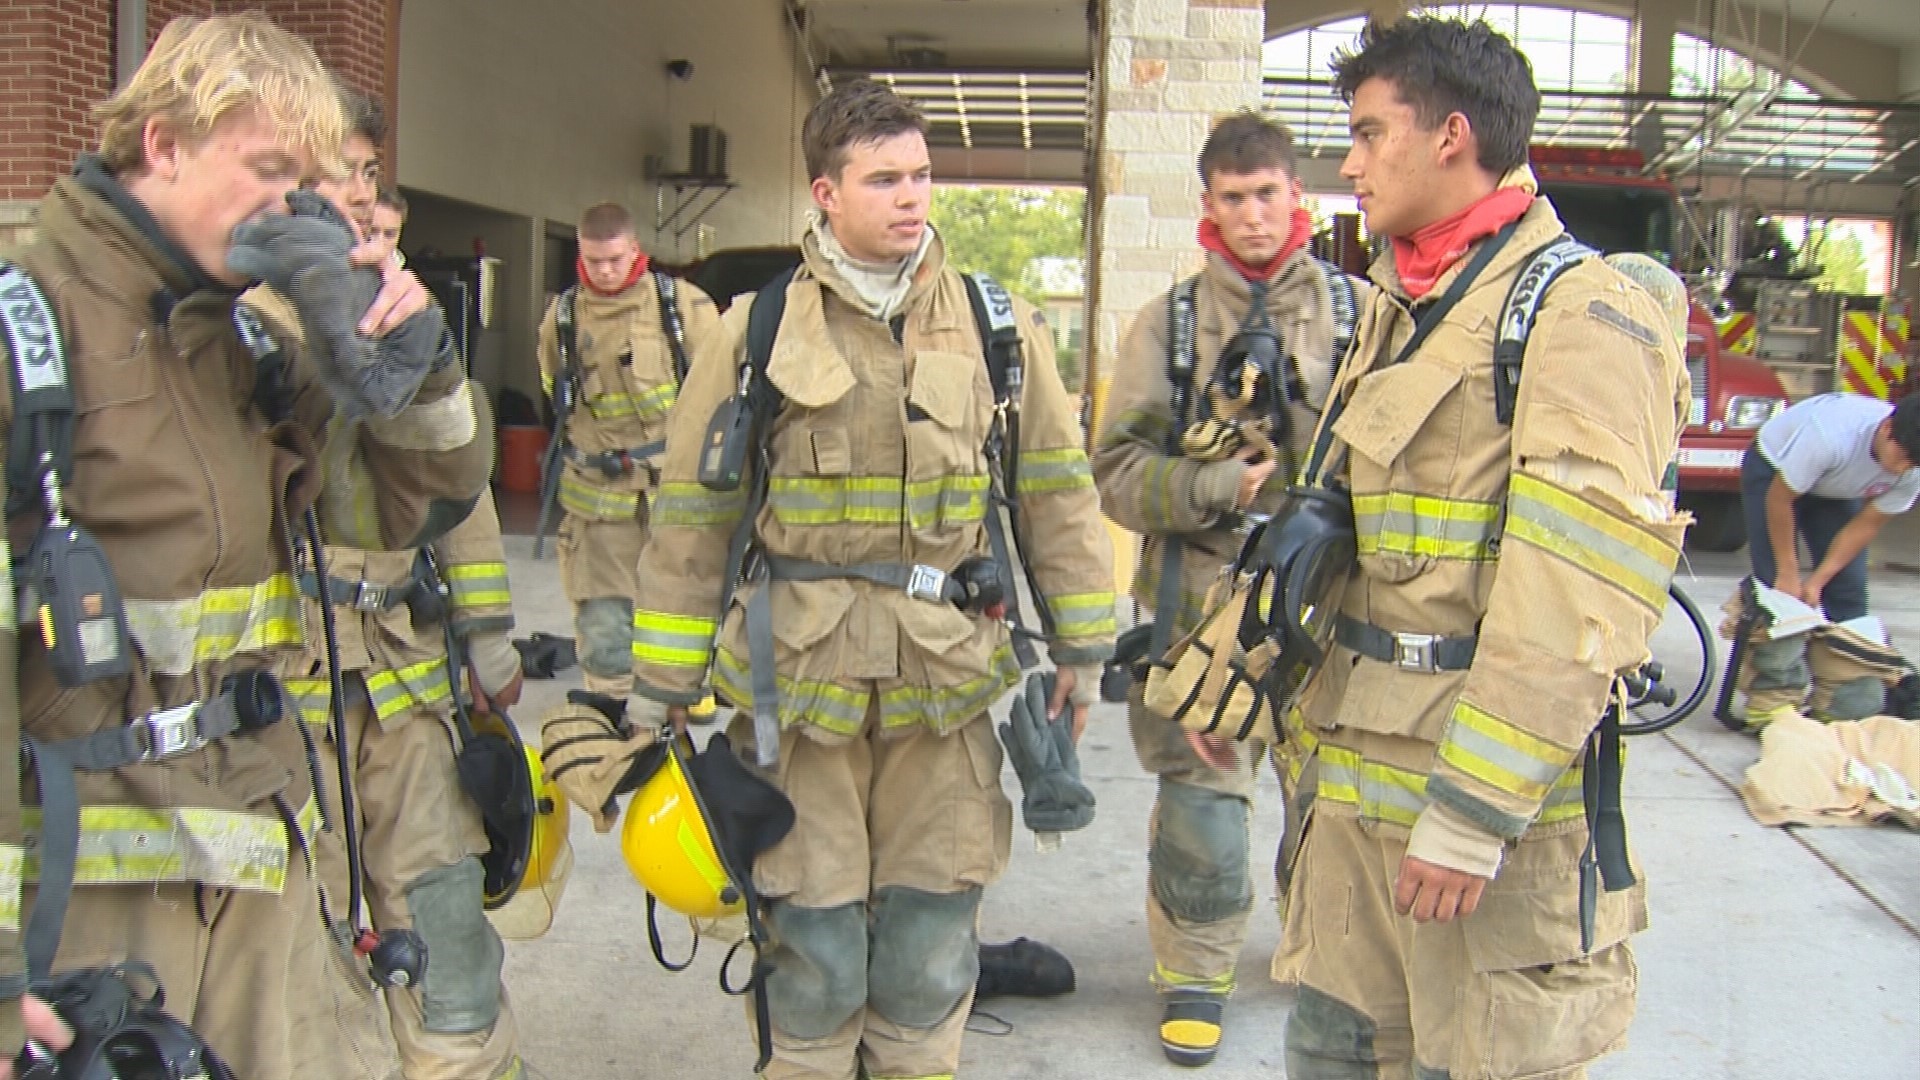 The Firefighter Academy is a partnership between Hays CISD and the Kyle Fire Department.